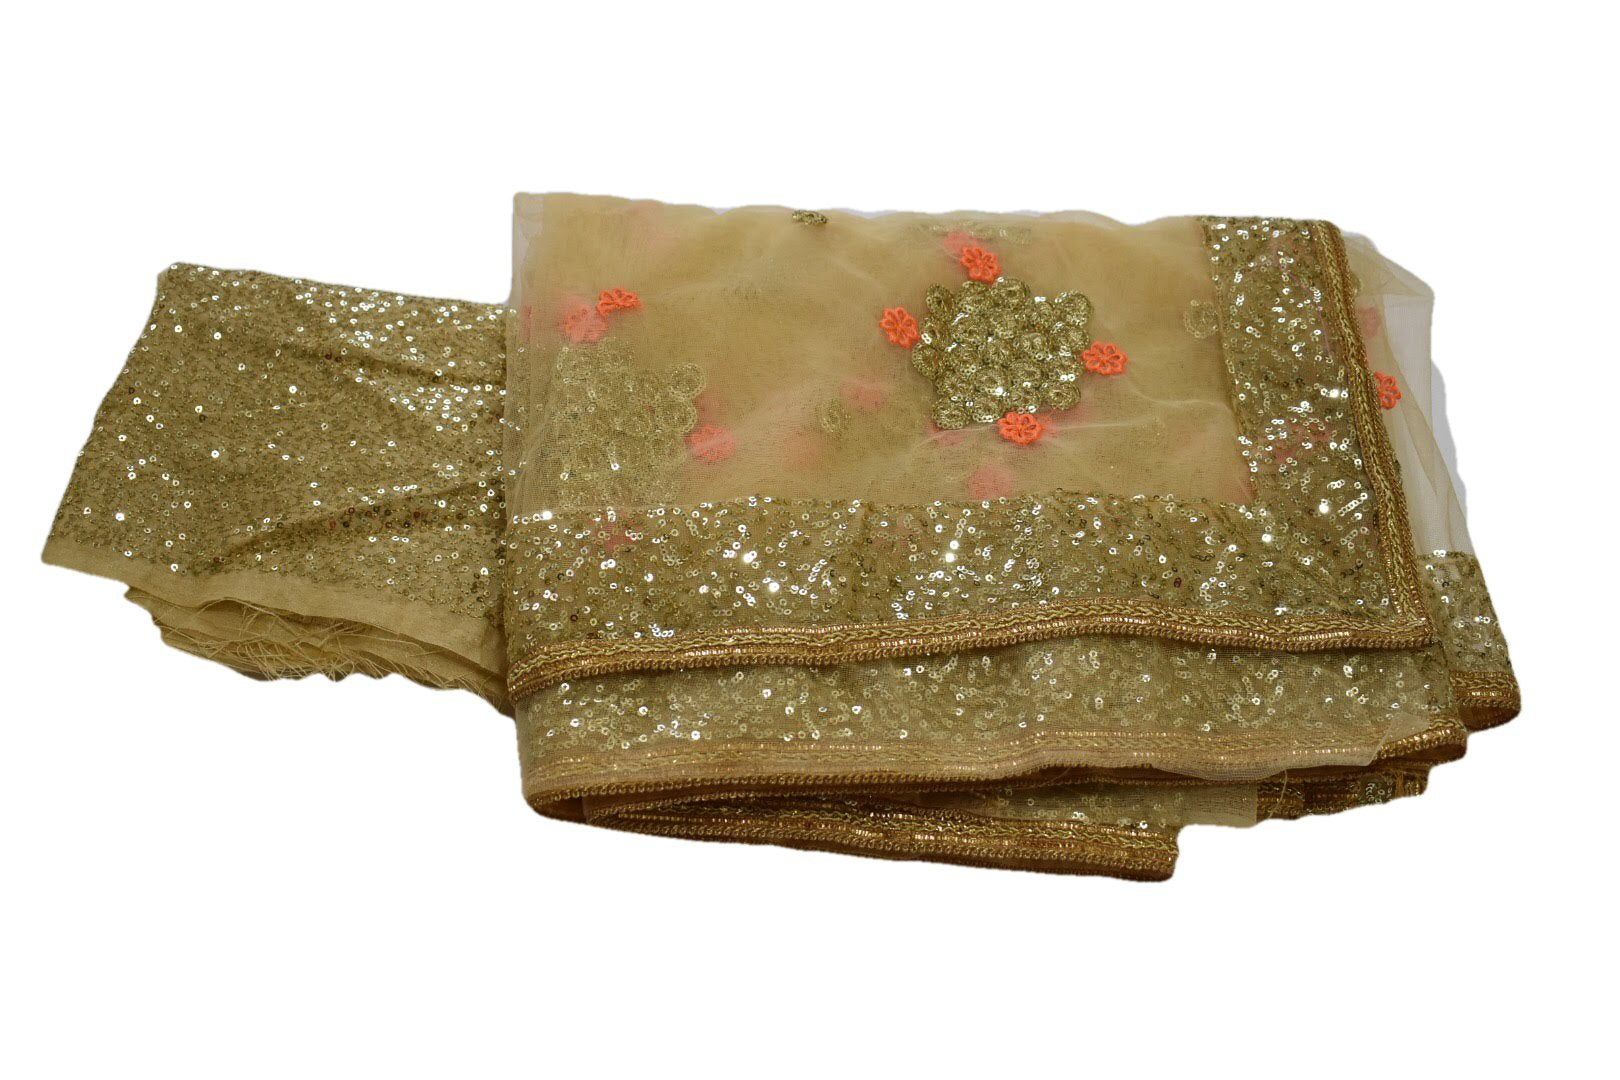 Brown Color - Pure Chiffon Net Embroidered Saree - Shiny Gold Sequin Border And Floral Pattern